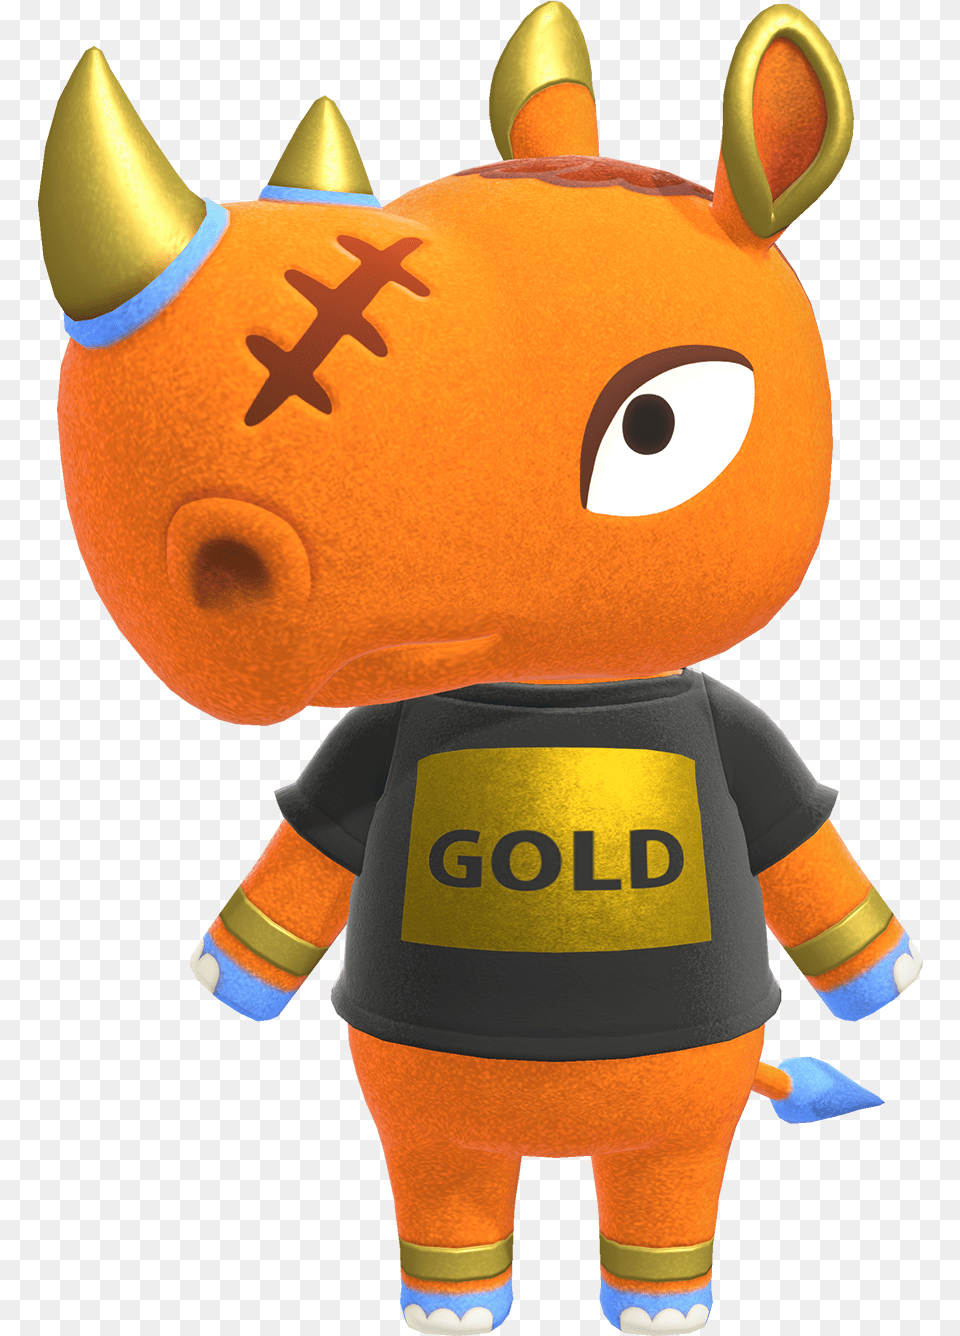 Spike Spike From Animal Crossing, Plush, Toy, Mascot Free Transparent Png